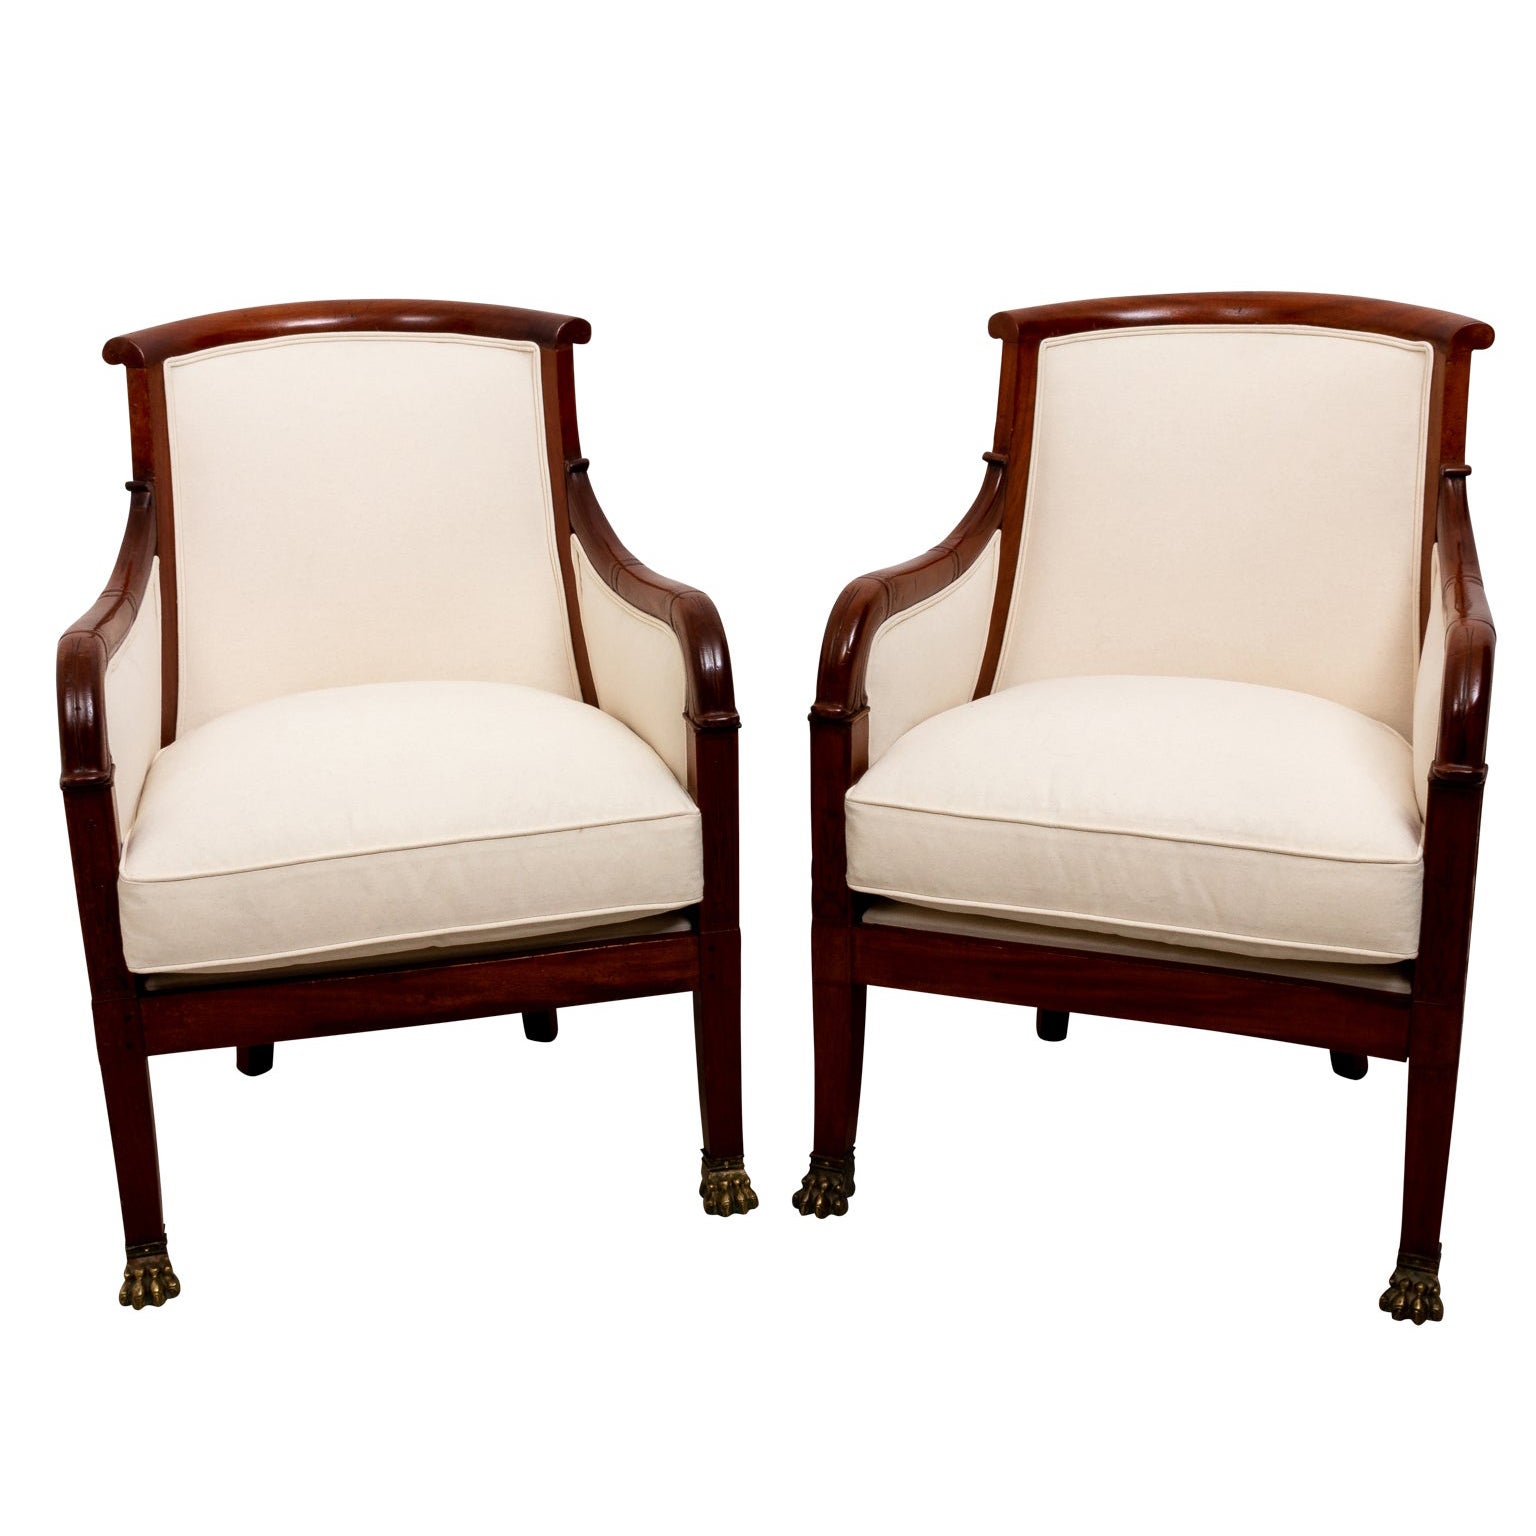 Pair of Lions Paw Tub Chairs in the Regency Style